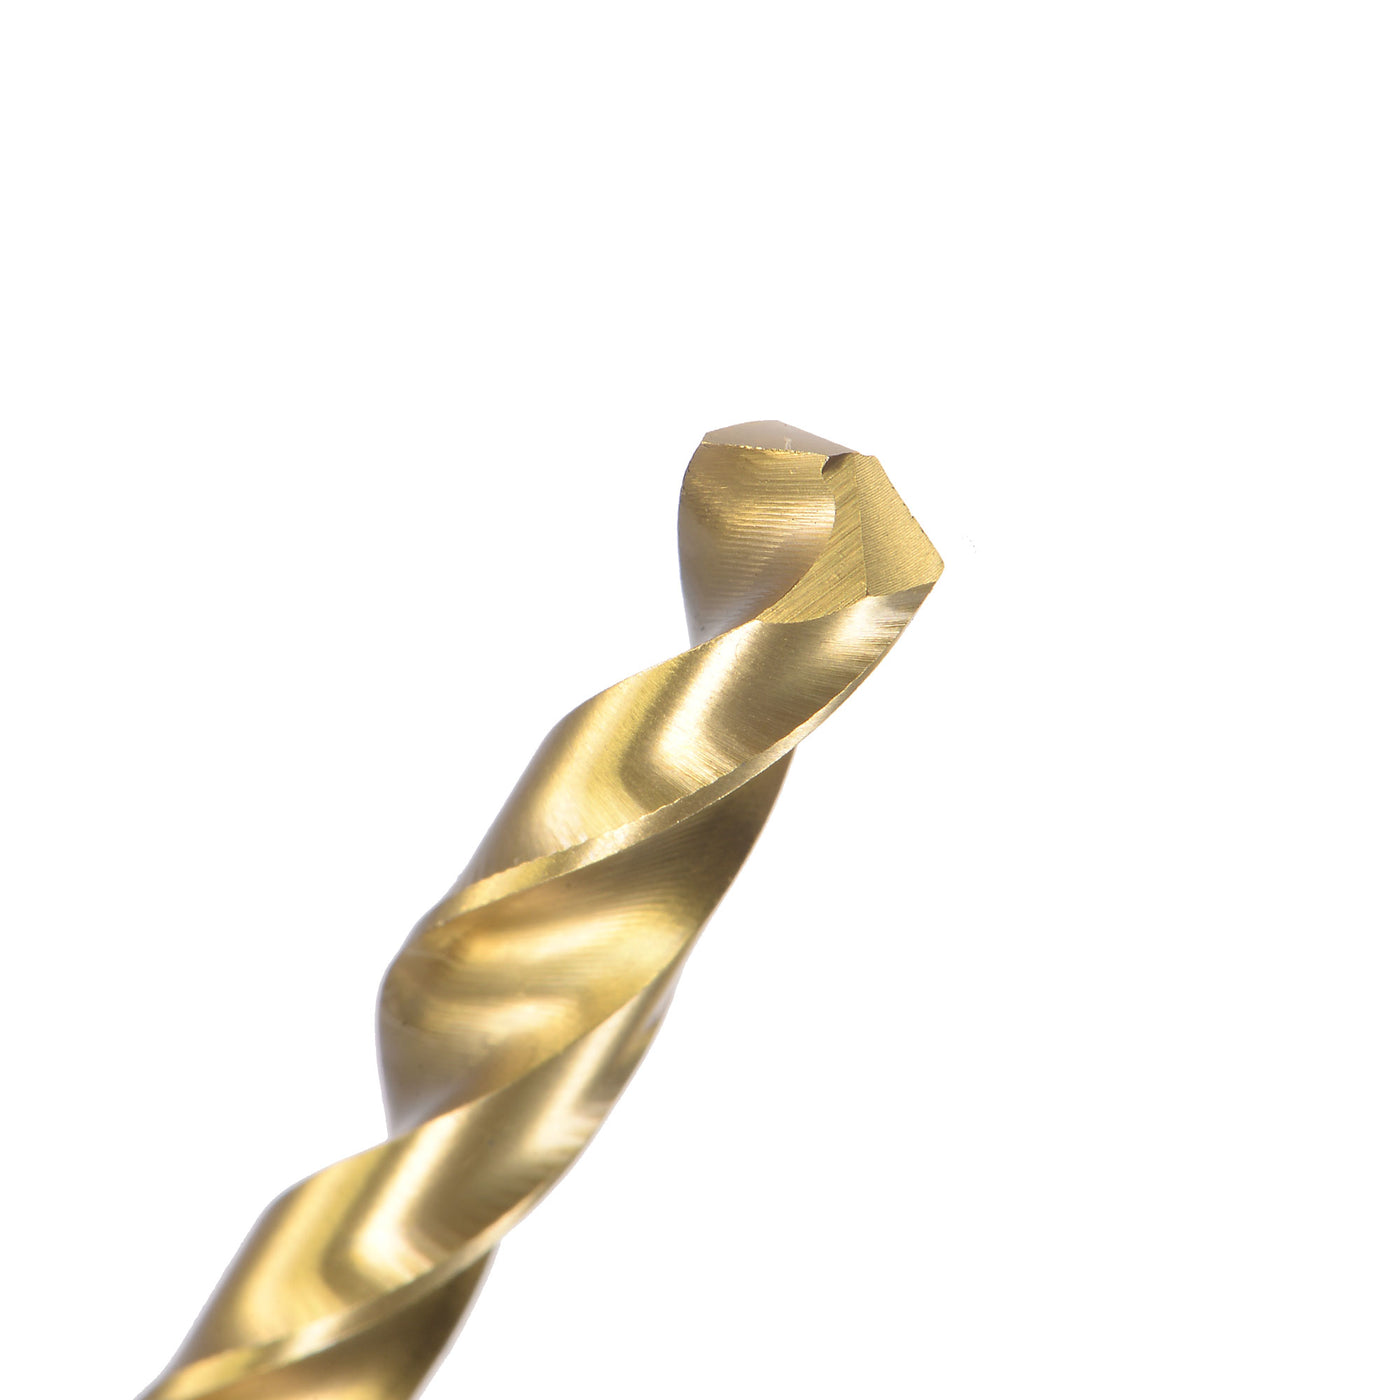 uxcell Uxcell High Speed Steel Twist Drill Bit 6.5mm Fully Ground Titanium Coated 2 Pcs